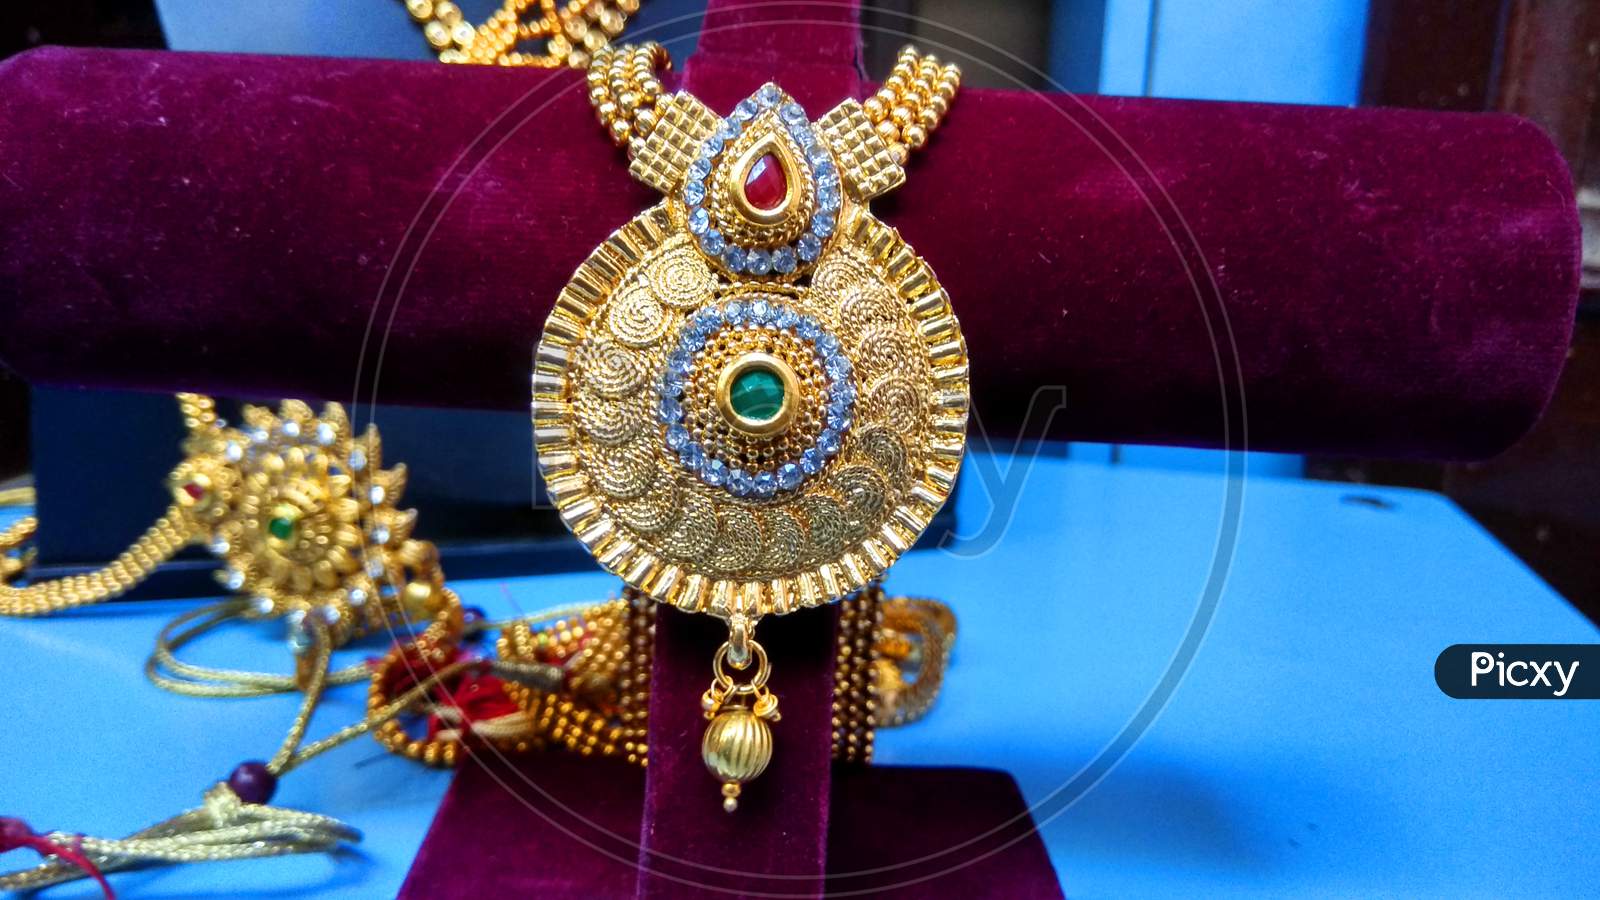 Beautiful Jewelry, Artificial Jewelry in Form of Gold, Necklace, earrings, pendant etc